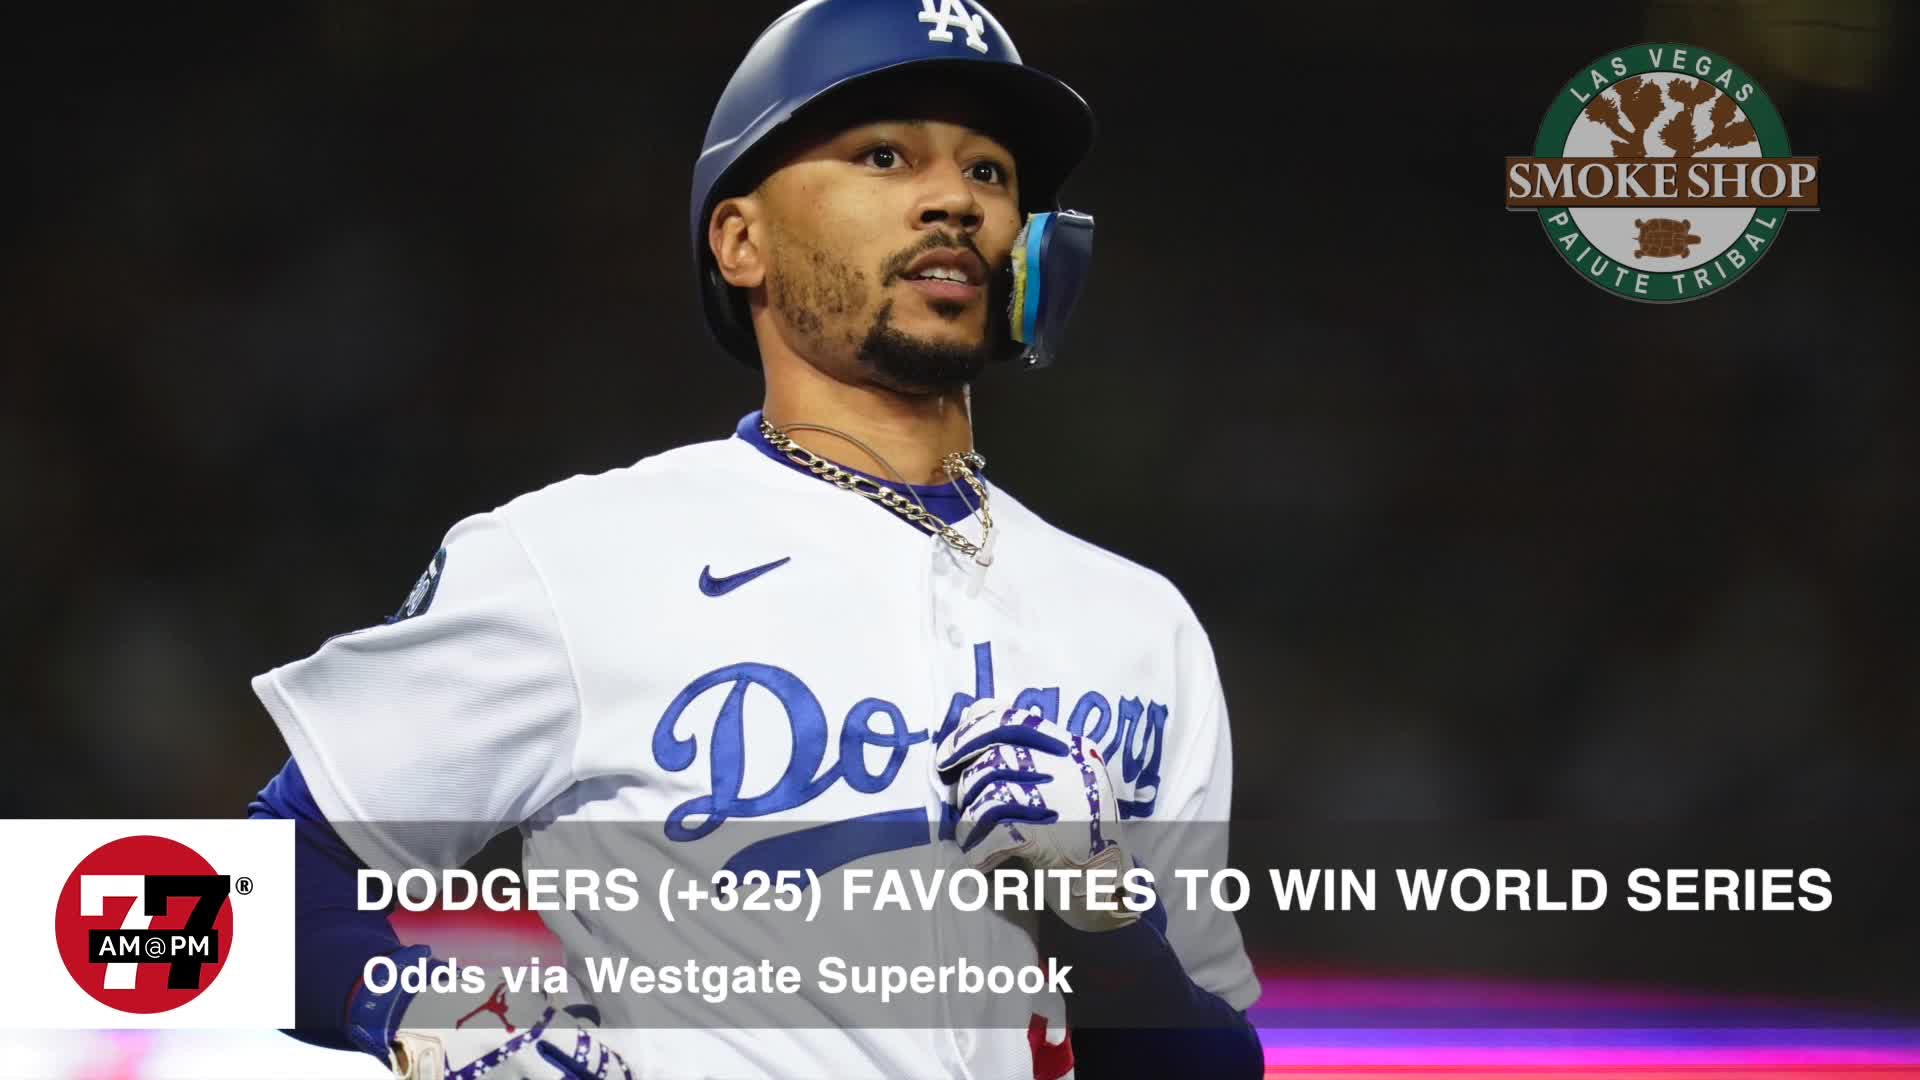 Dodgers +325 favorites to win world series